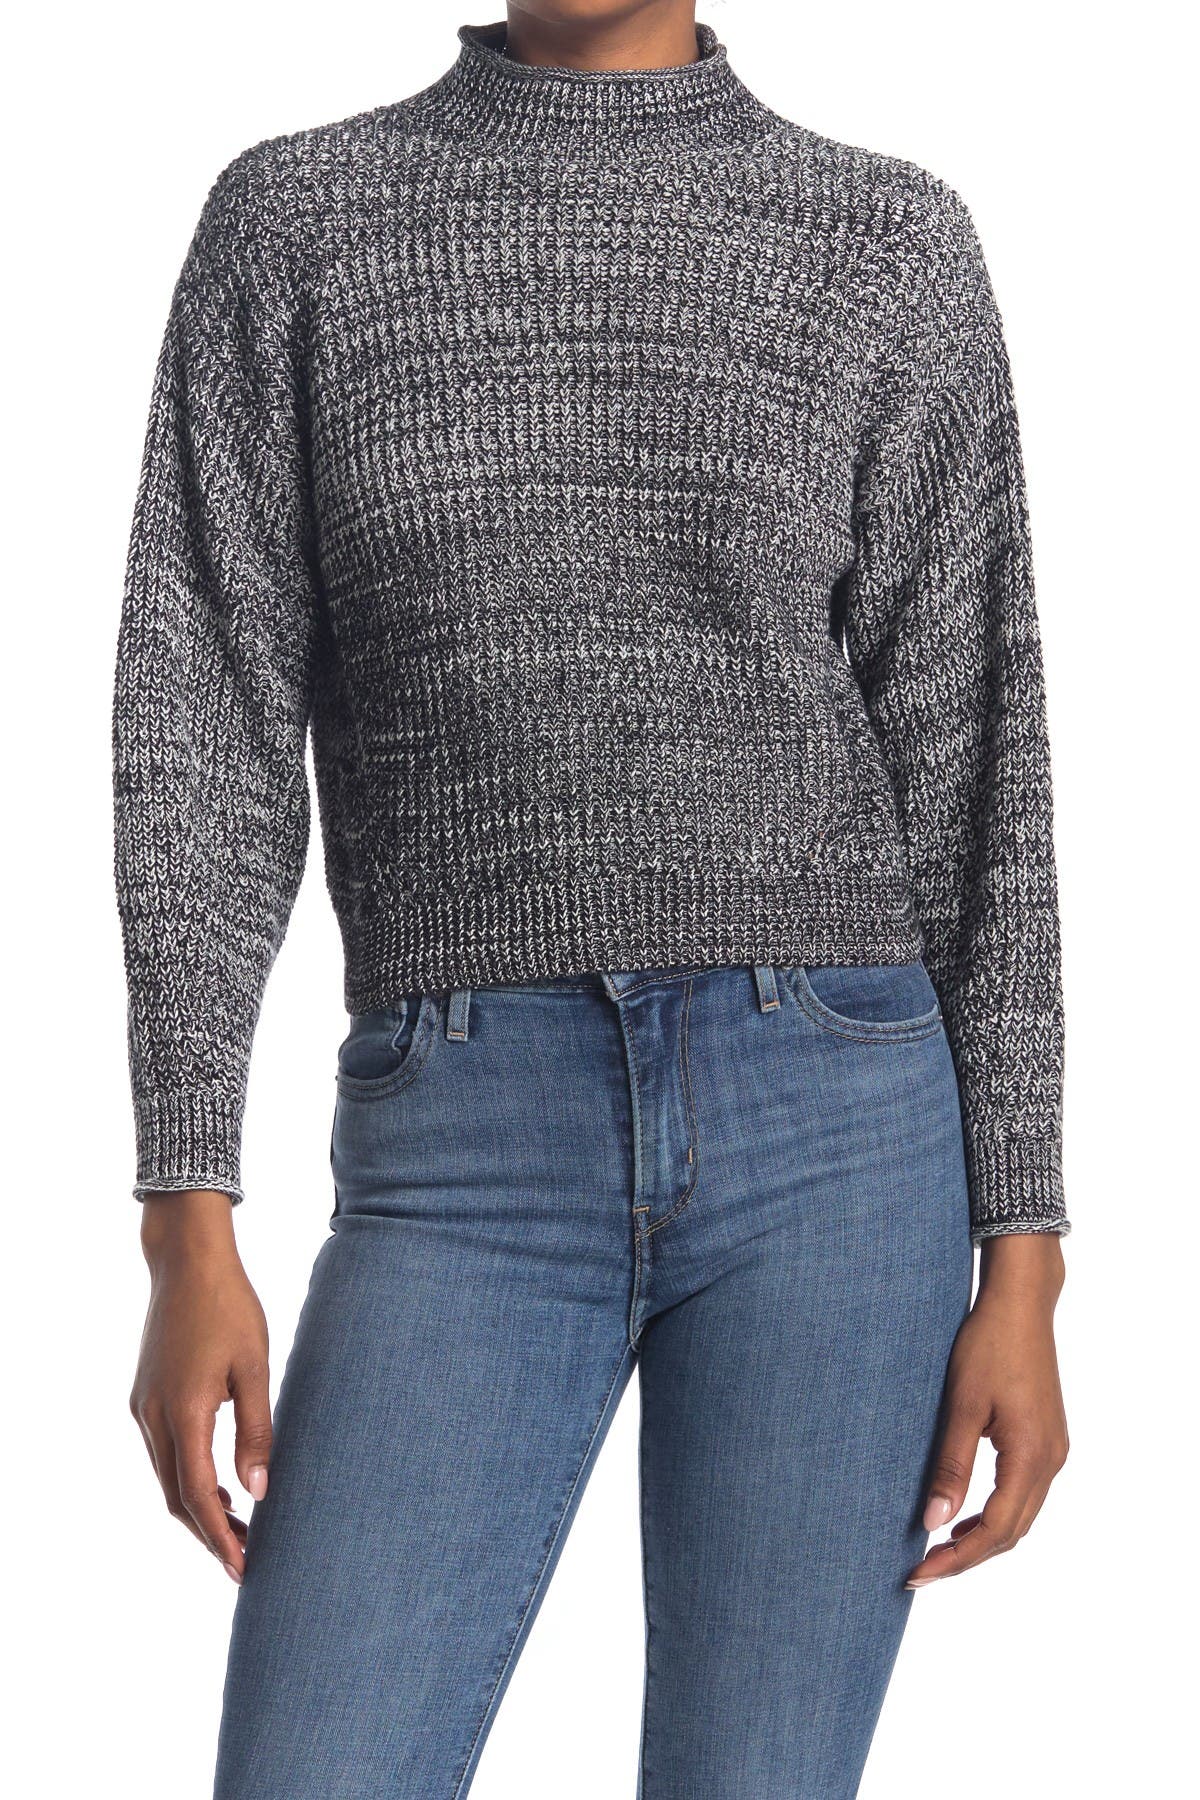 Abound Easy Stitch Ribbed Knit Mock Neck Sweater In Black